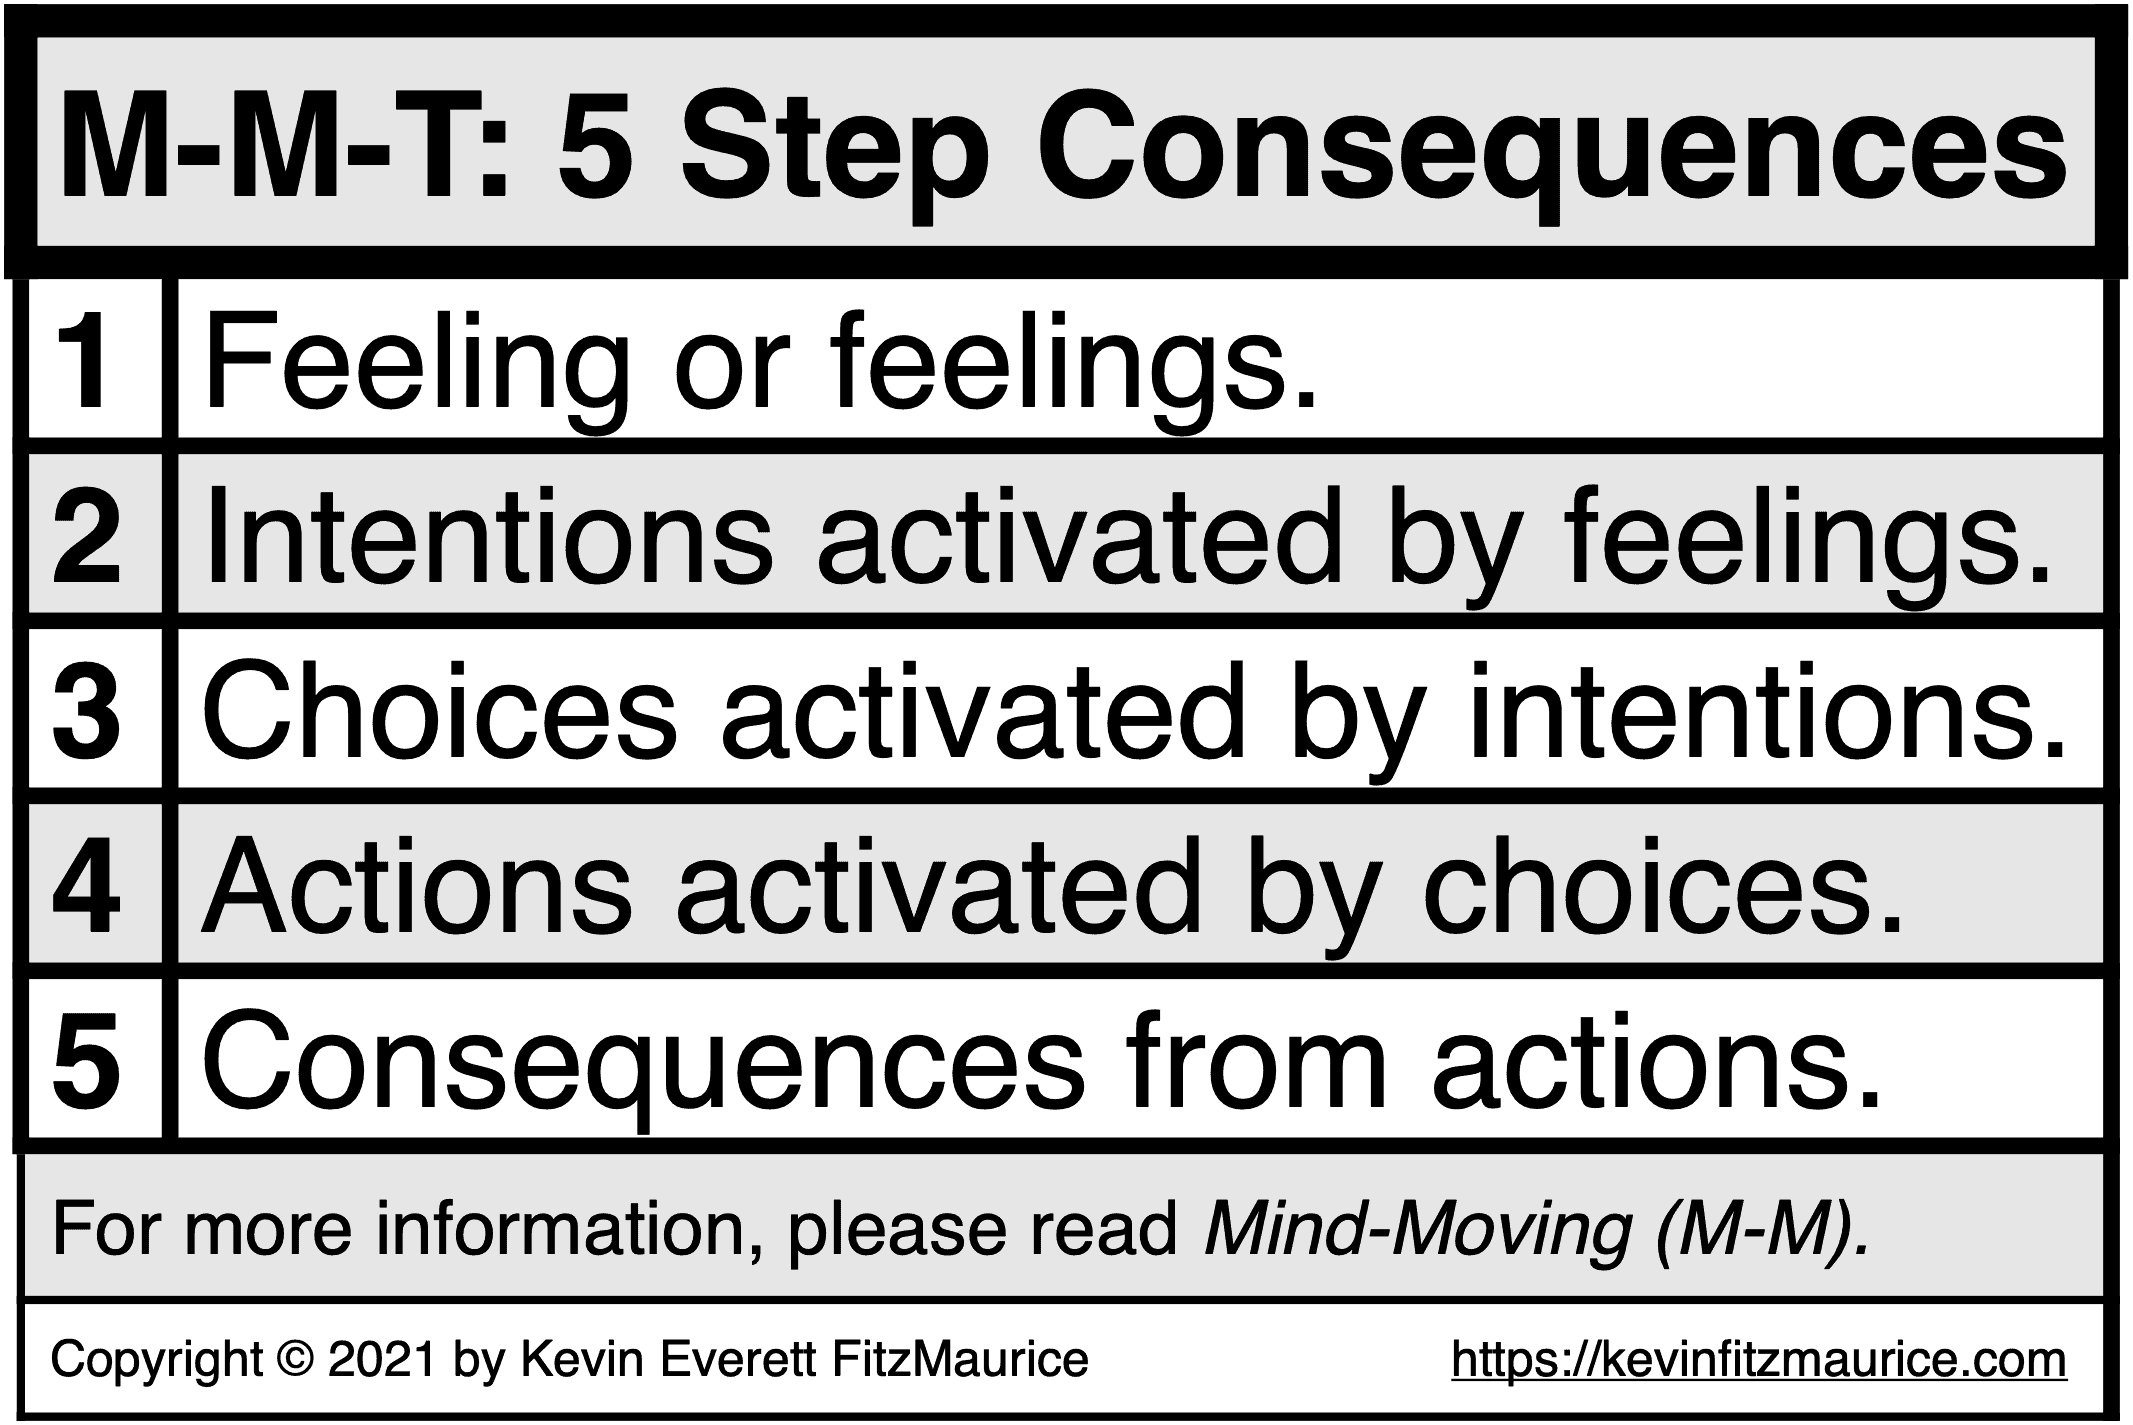 M-M-T: 5 Step Consequences